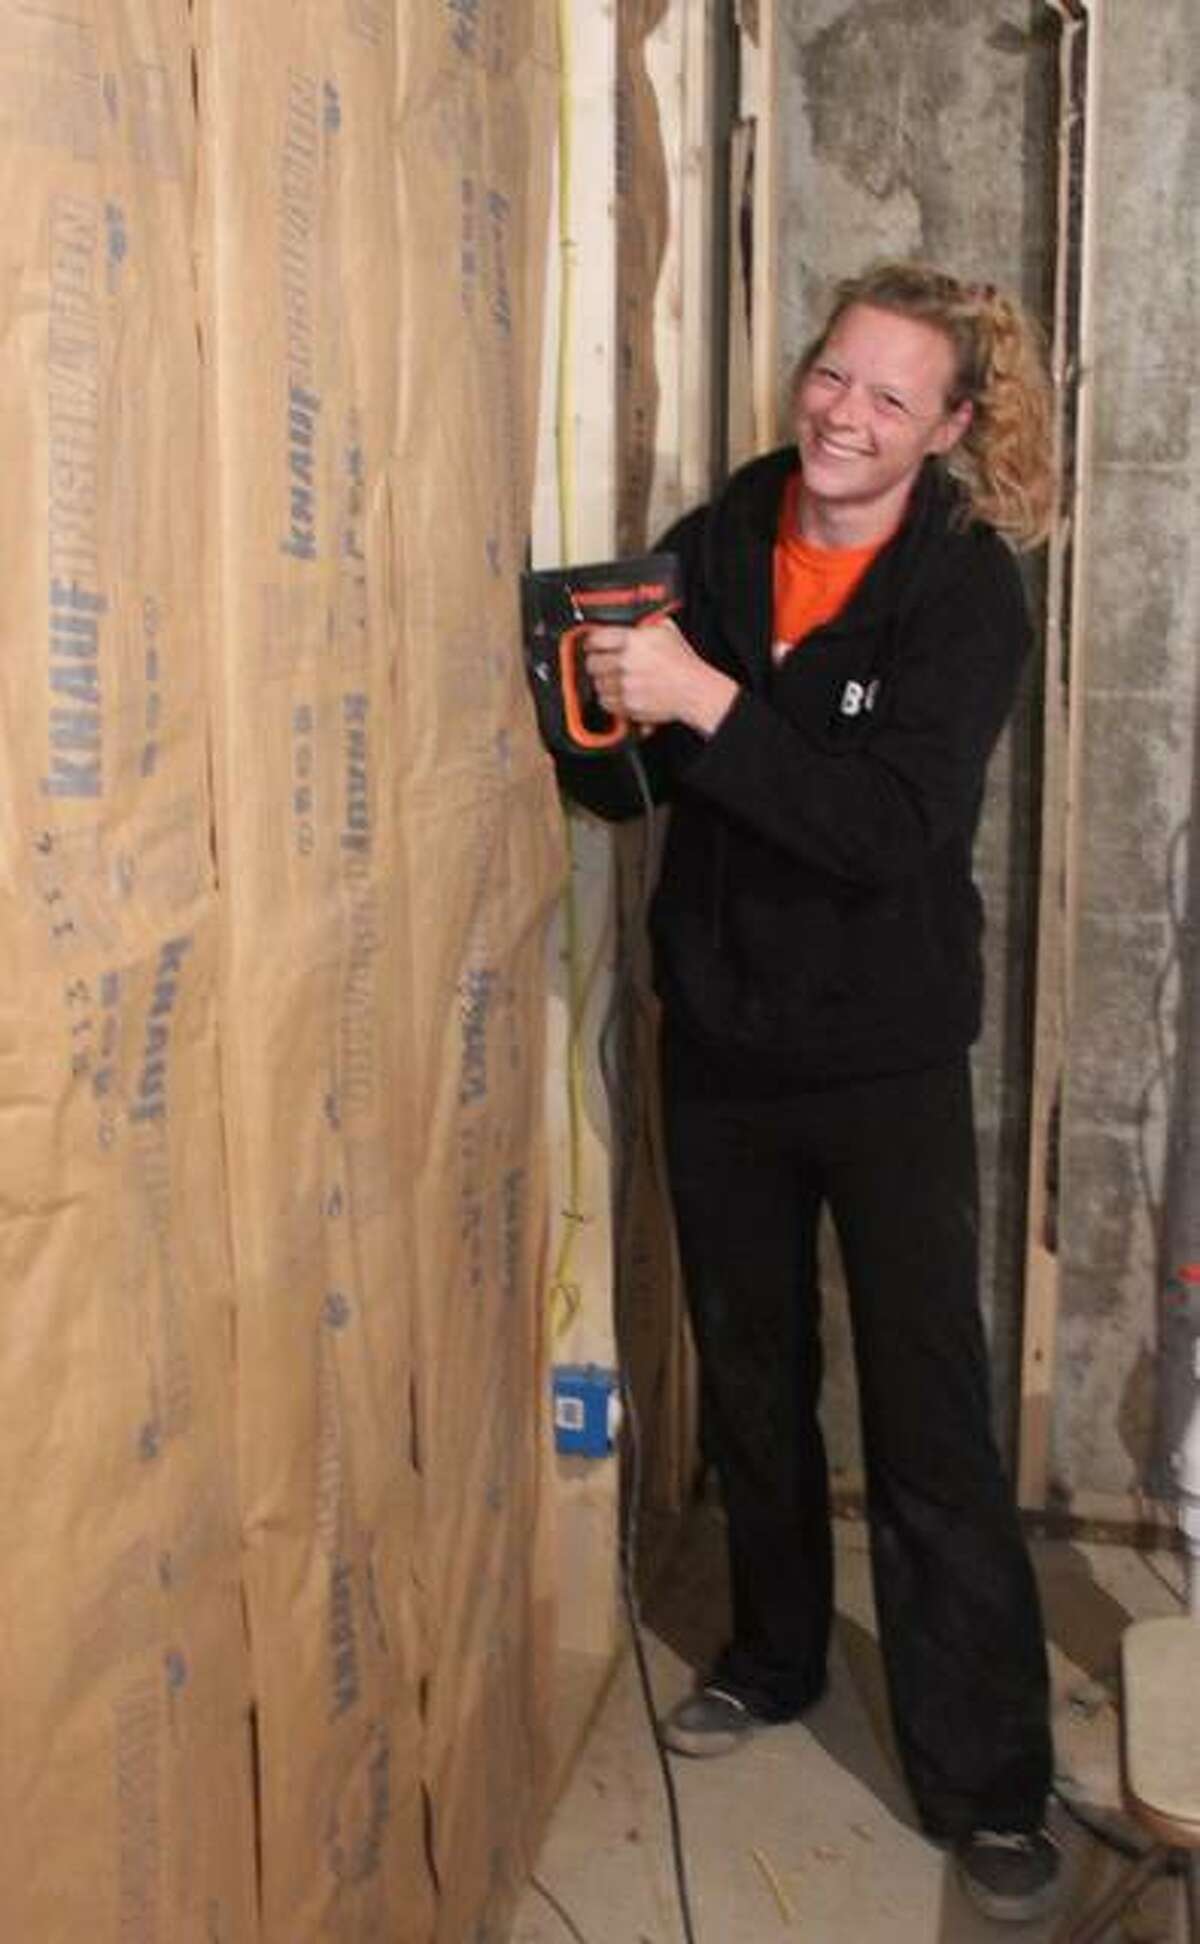 Laura Flamuth, the future recipient of the house, helps finish insulating the walls.